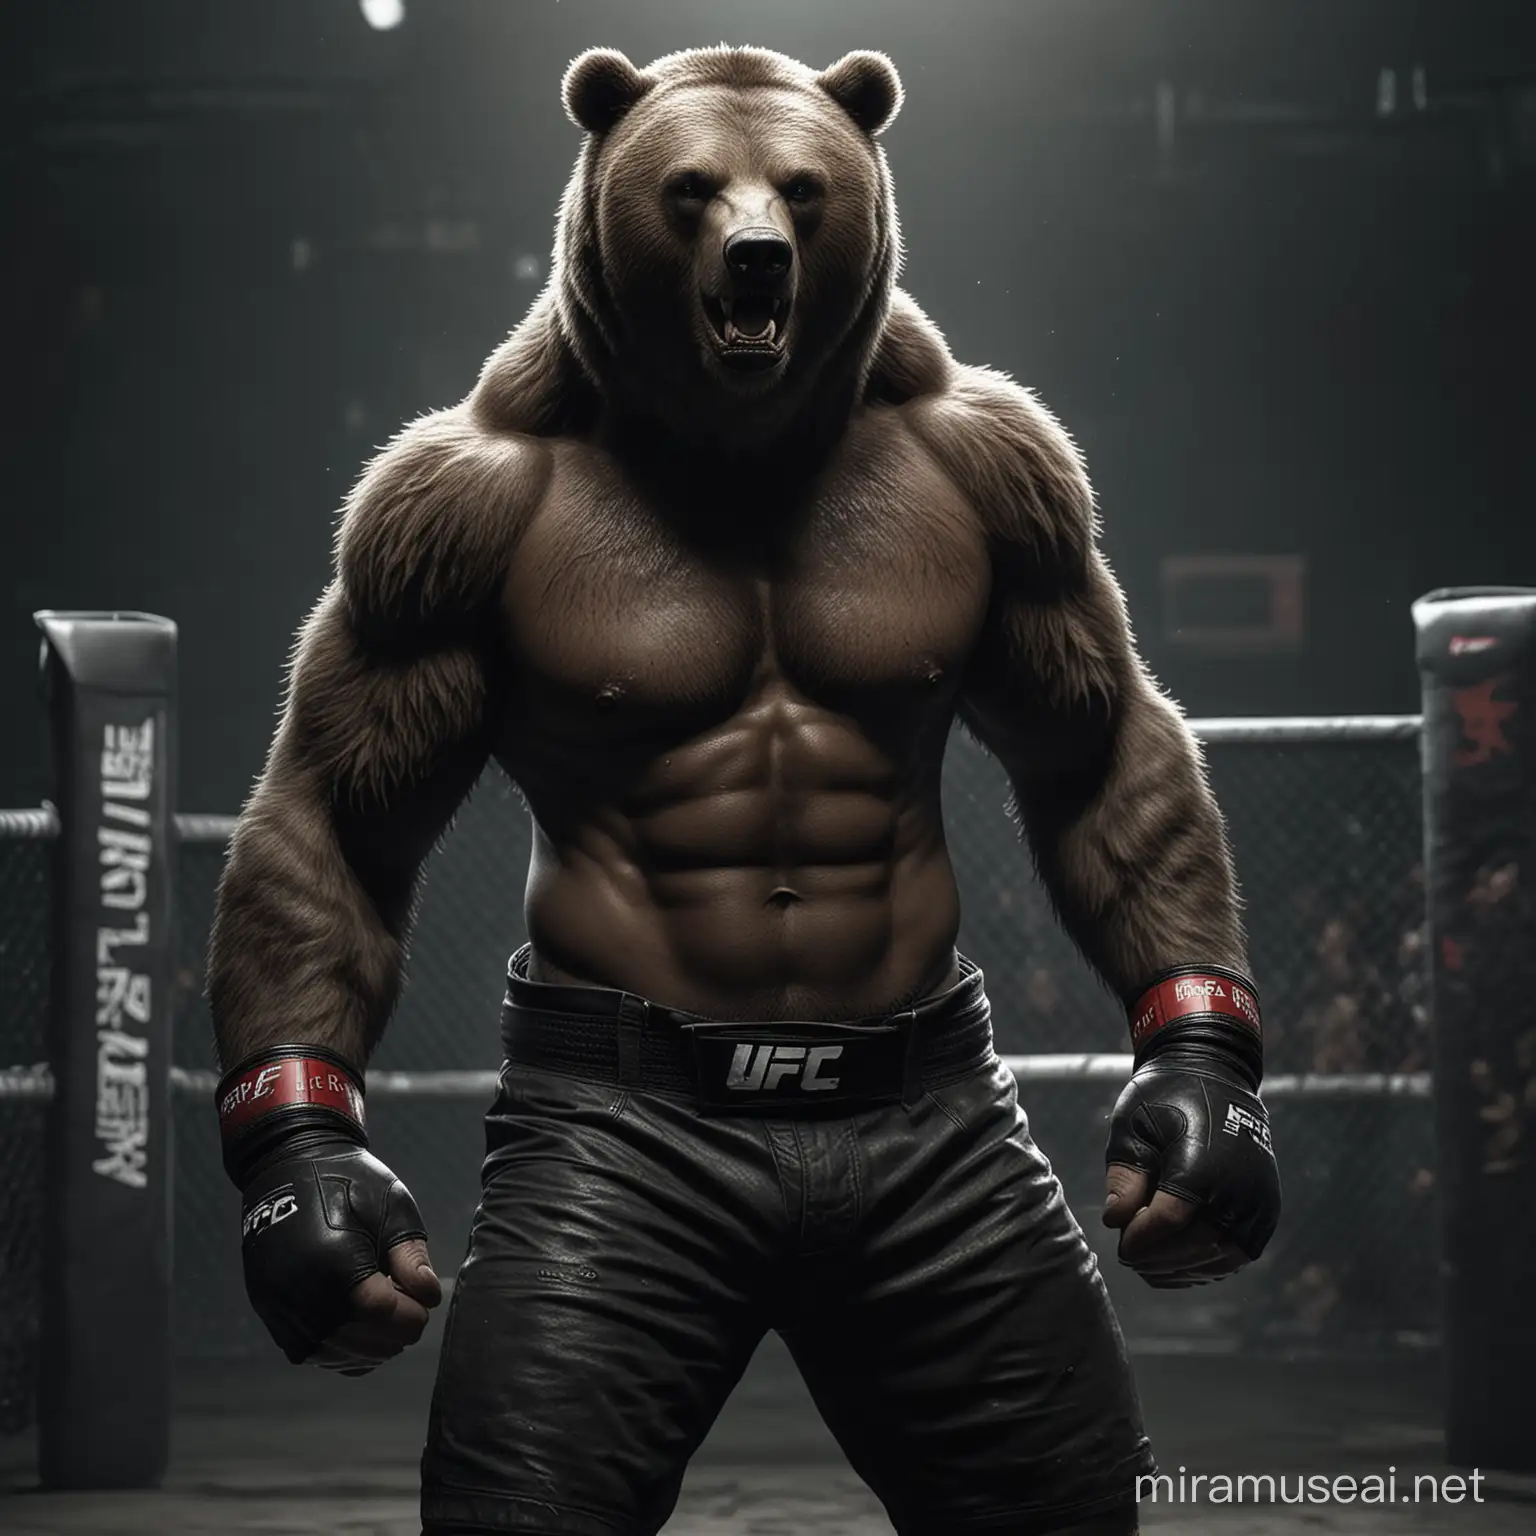 half humanoid bear as ufc fighter,make it serious and dangerous,dark atmosphere,realistic